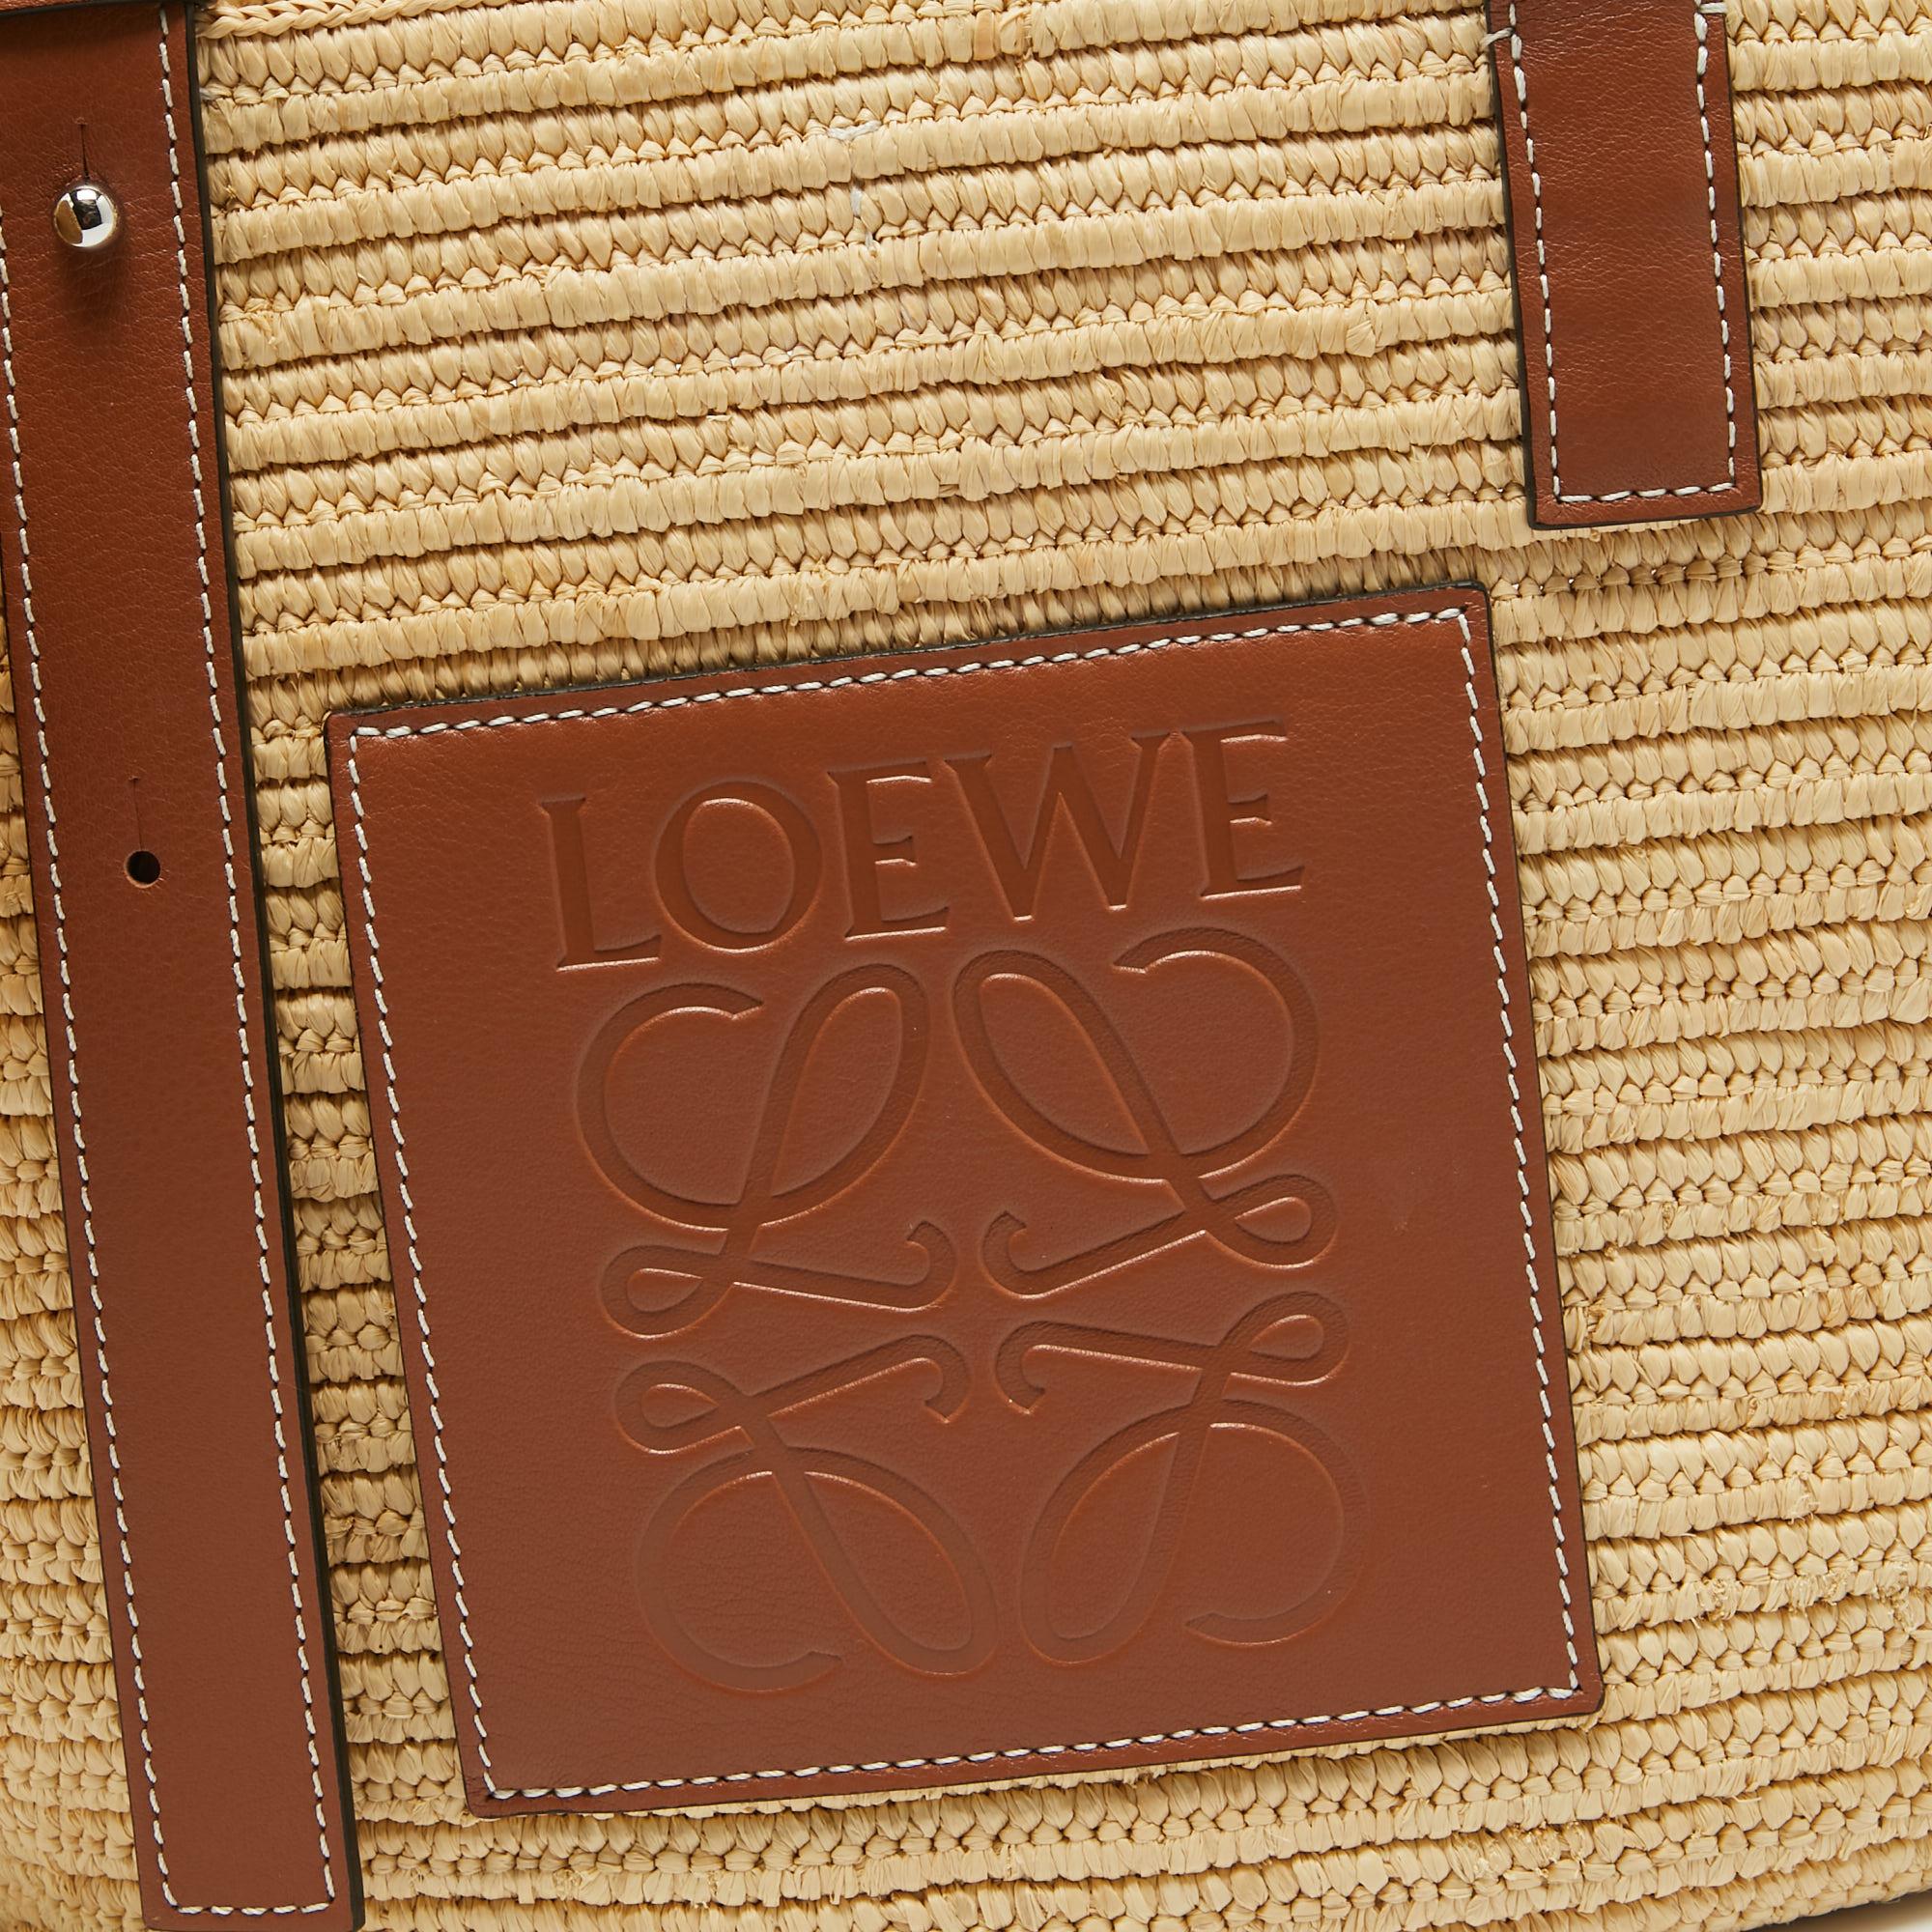 Loewe Brown/Natural Palm Leaf and Leather Elephant Basket Tote 2